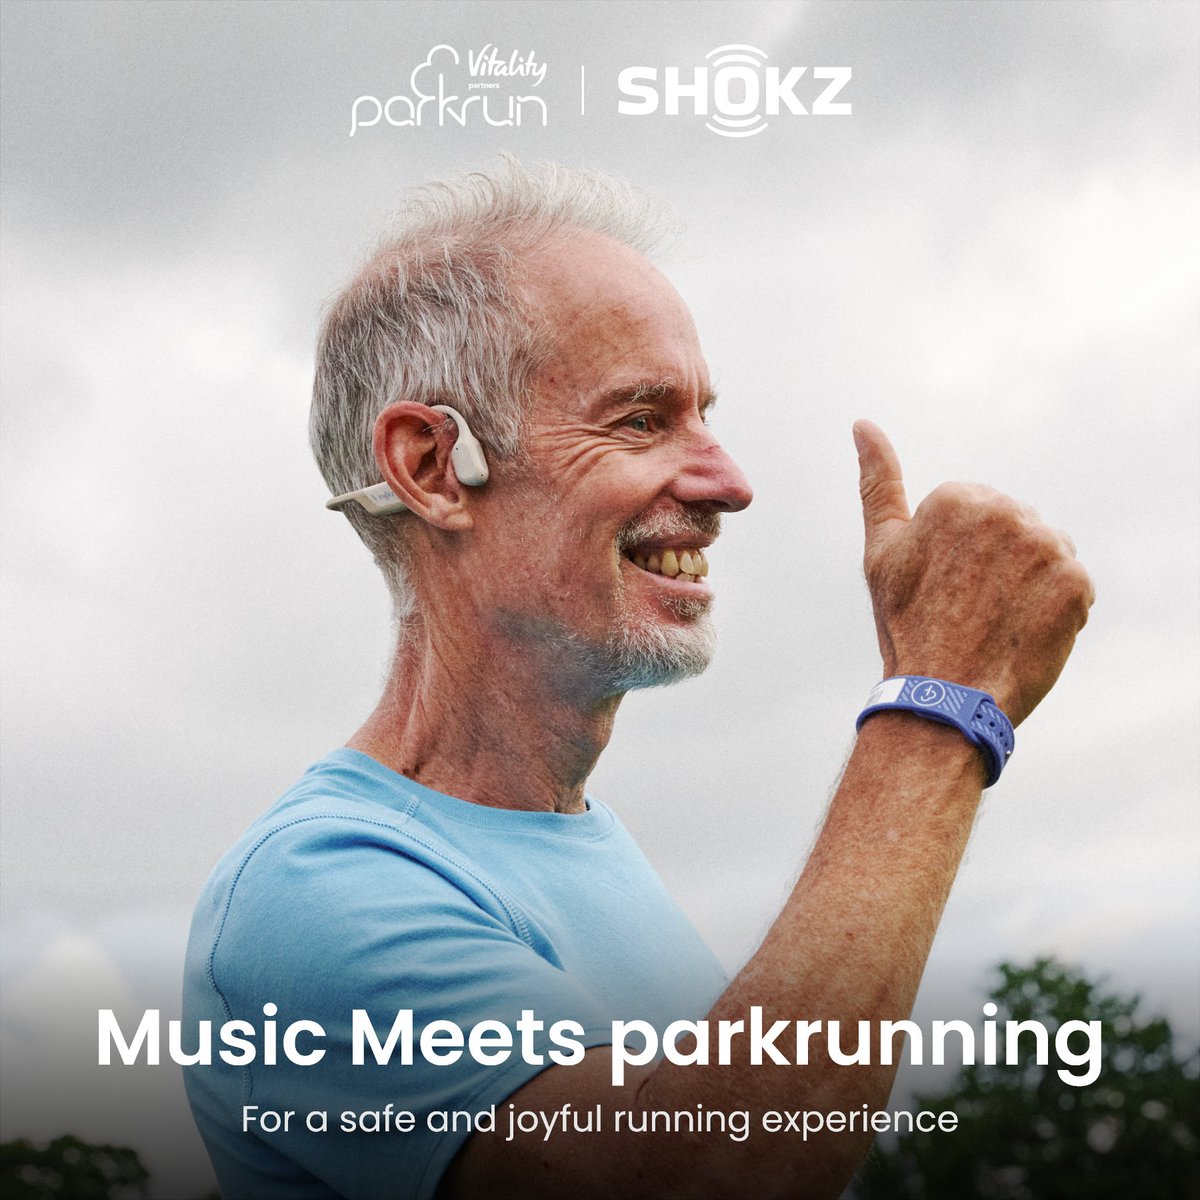 📢 Exciting News! Shokz and parkrun join forces in the UK! We are thrilled to announce our new partnership with parkrun. Shokz are here to enhance your joy and safety during every parkrun.🌟 Put on your Shokz, go to your local parkrun and let the music move you. 🎧 @parkrunUK